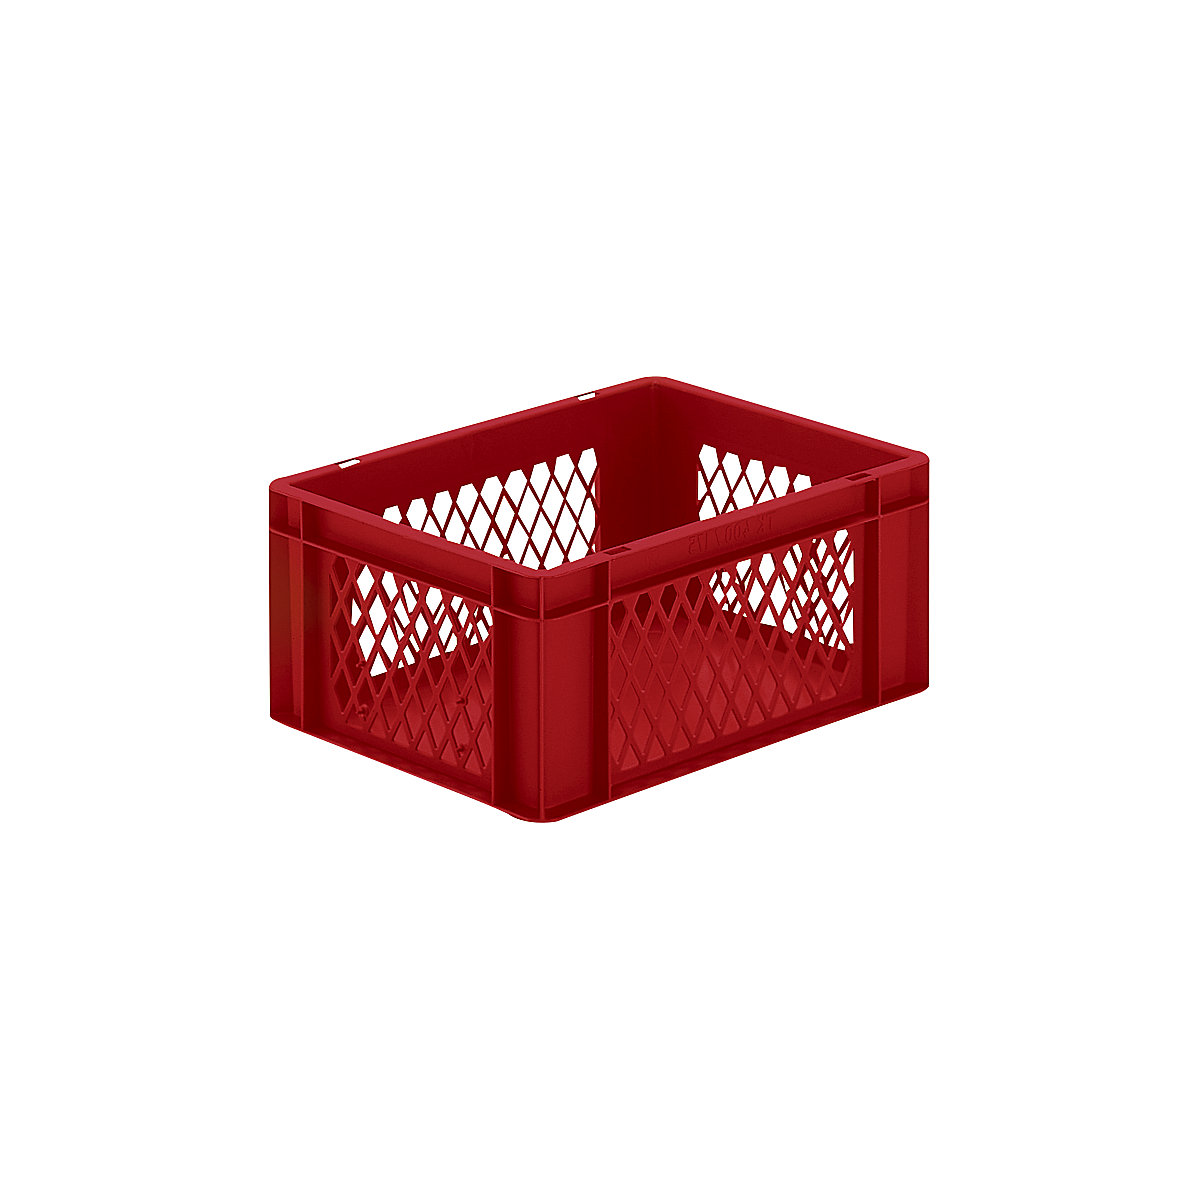 Euro stacking container, perforated walls, closed base, LxWxH 400 x 300 x 175 mm, red, pack of 5-6